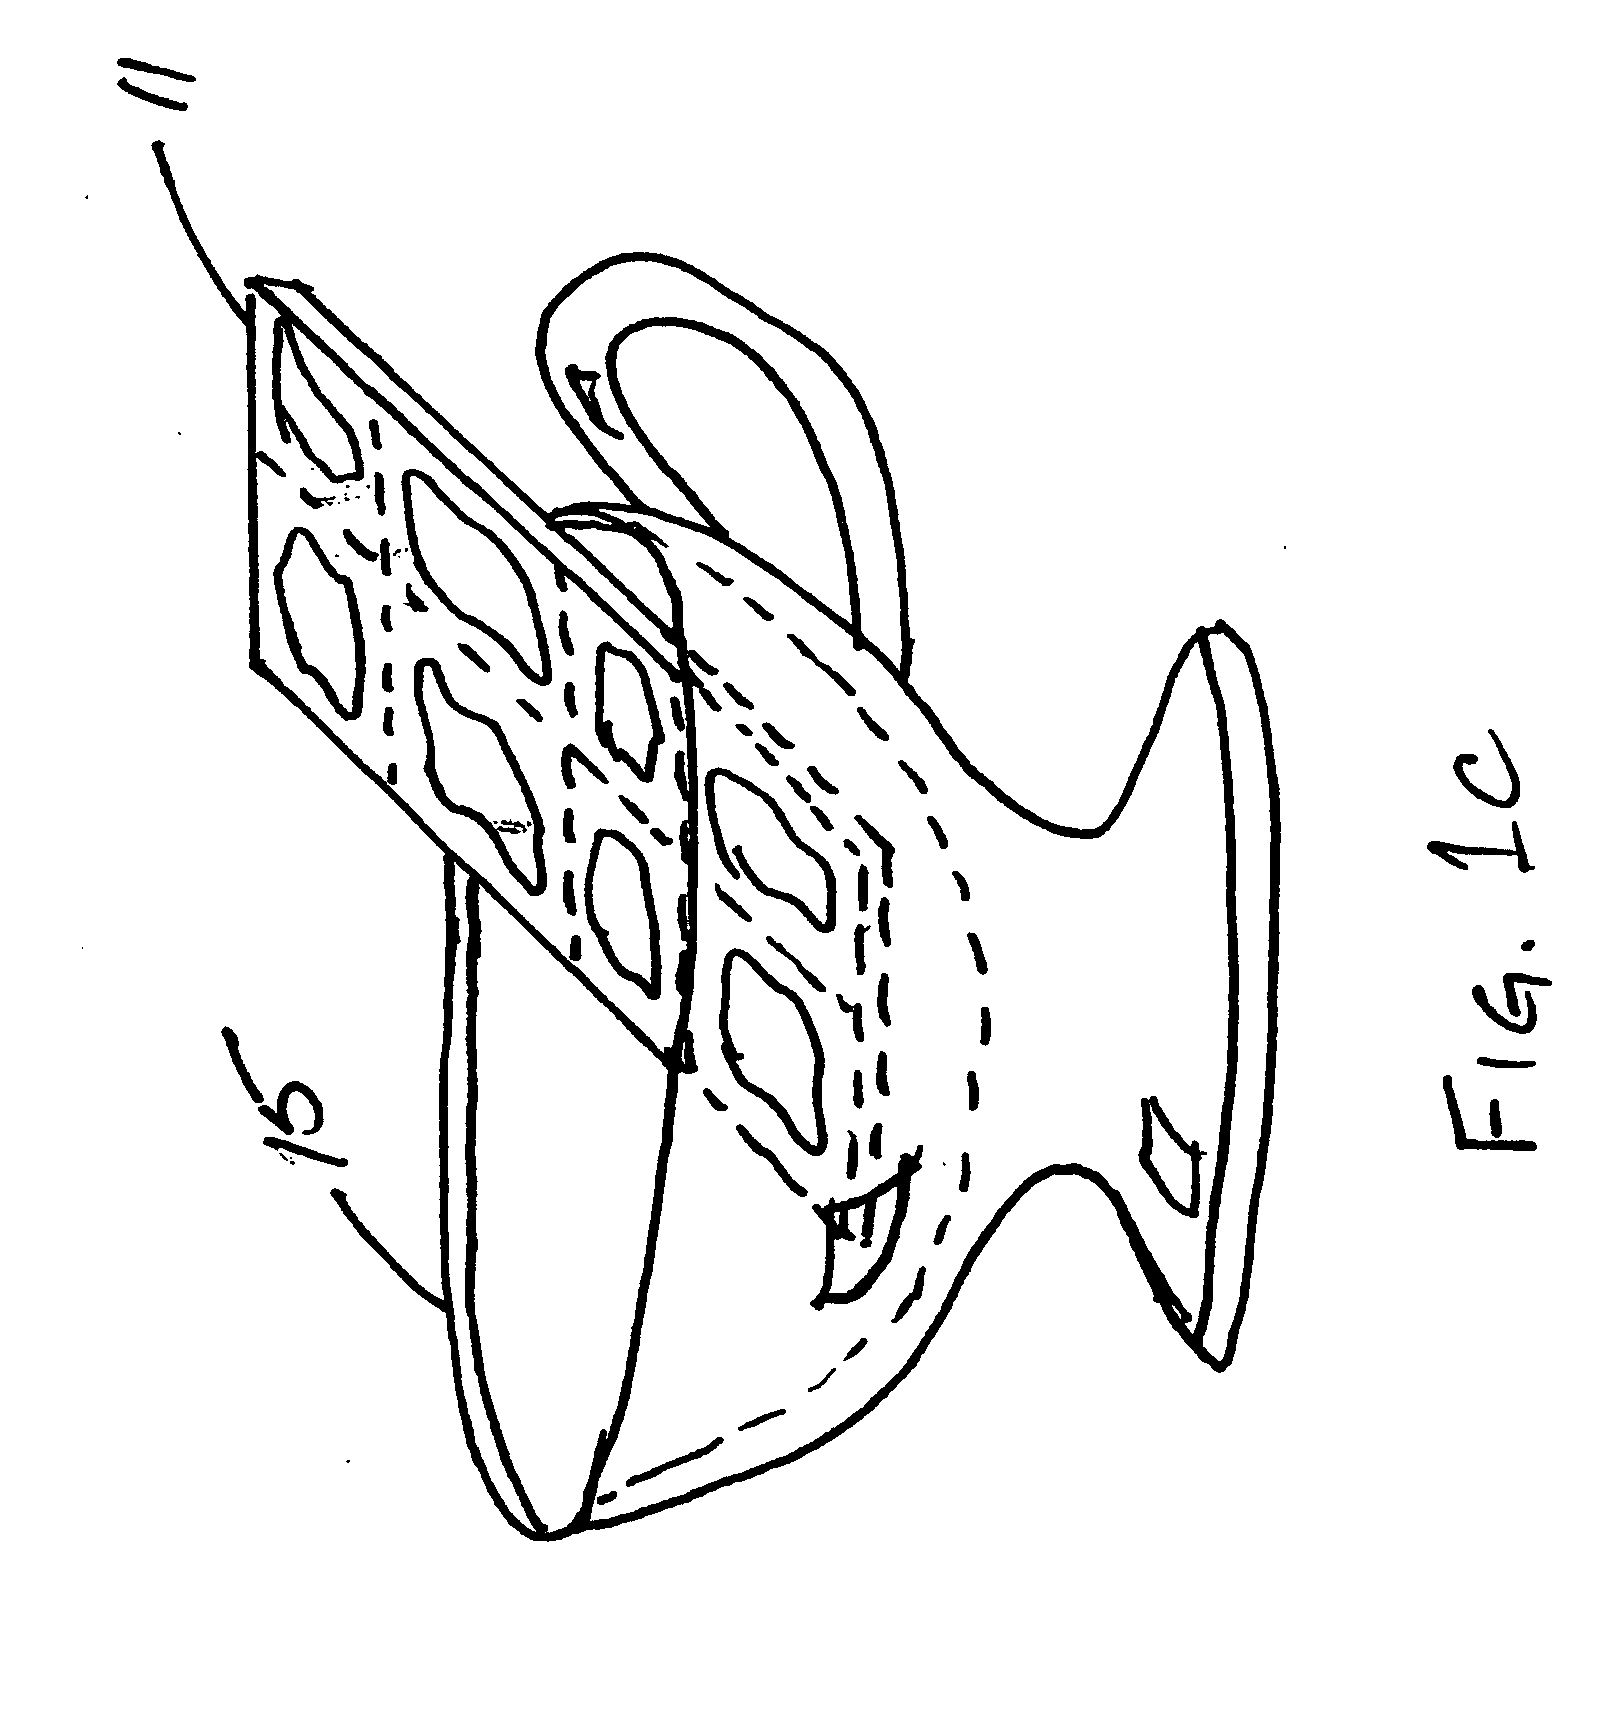 Method and apparatus for enhancing tasting experiences